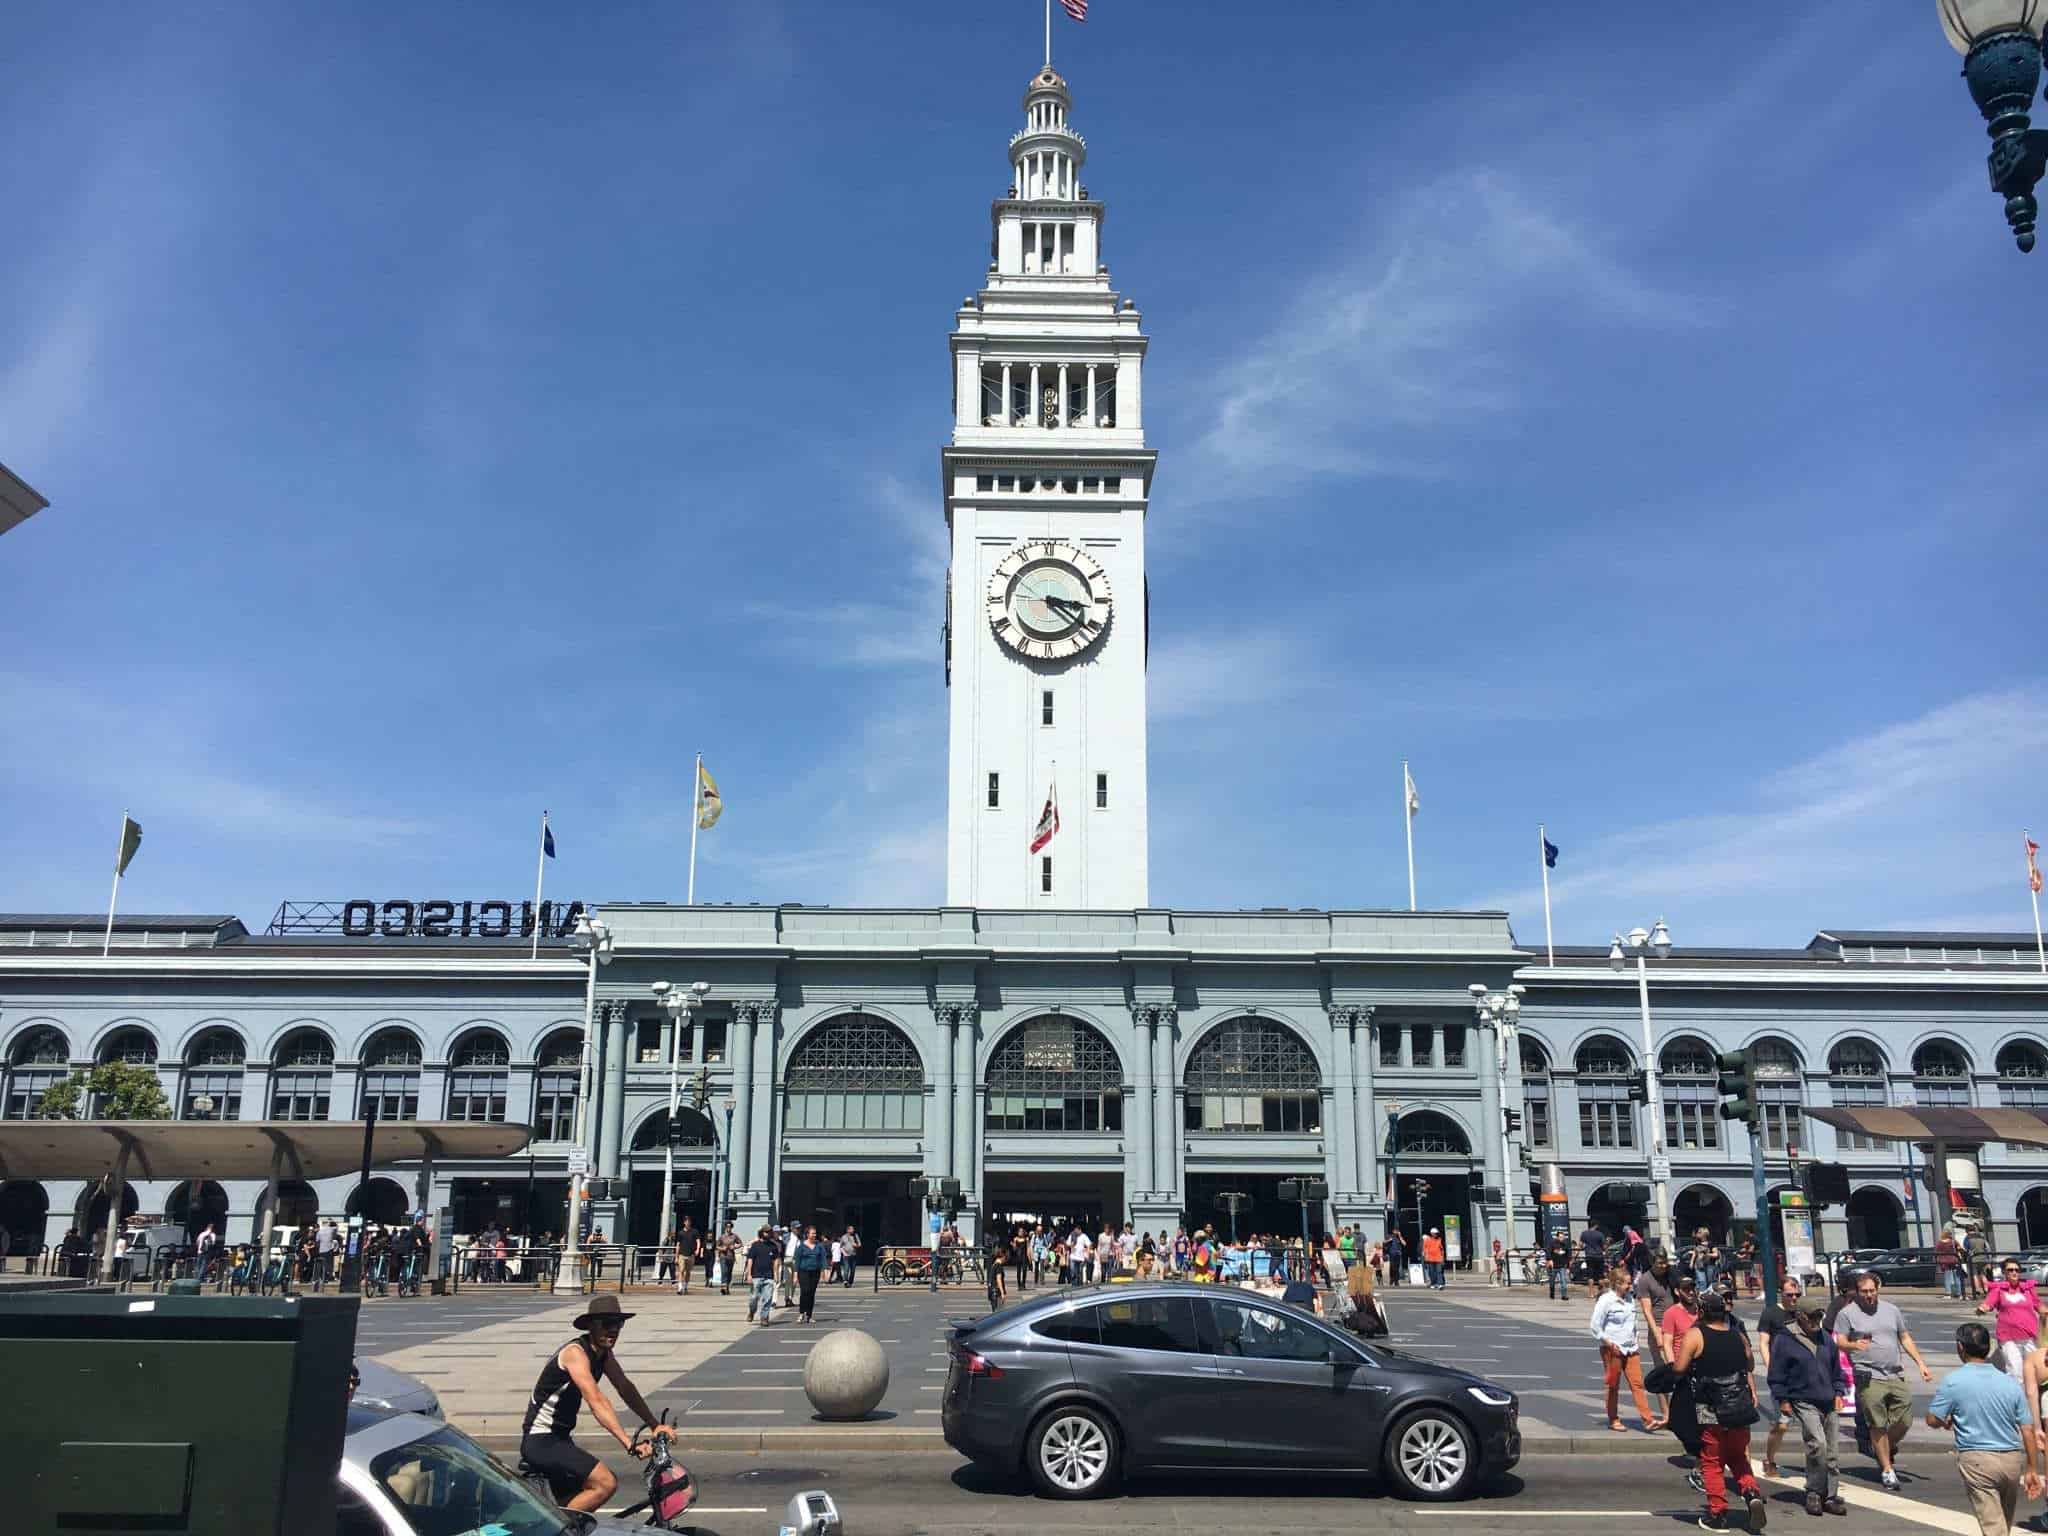 A Visit to the San Francisco Ferry Building Marketplace | Free Tours by